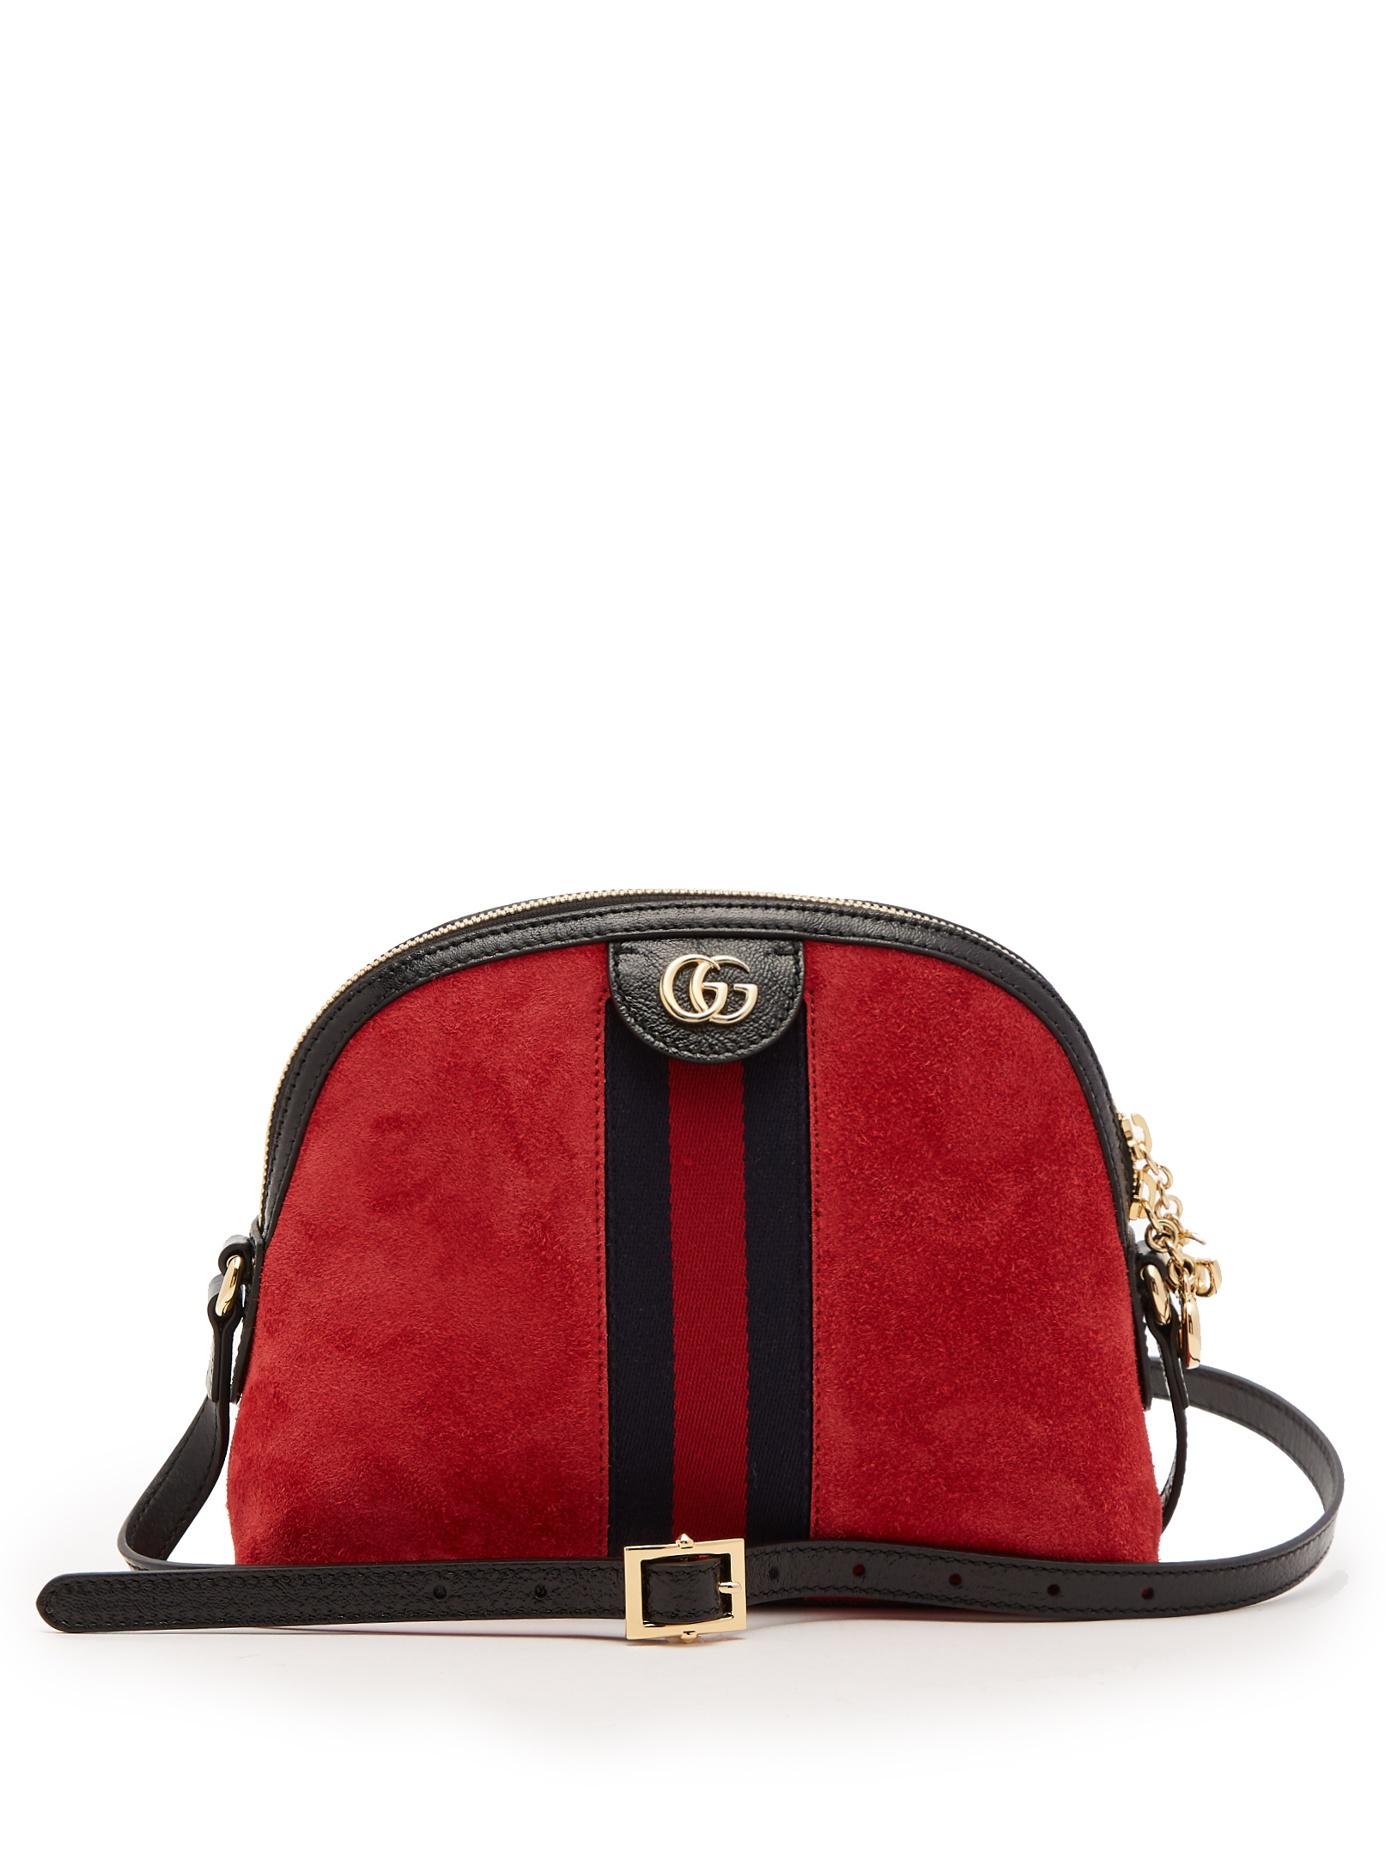 Lyst - Gucci Ophidia Suede Cross-body Bag in Red